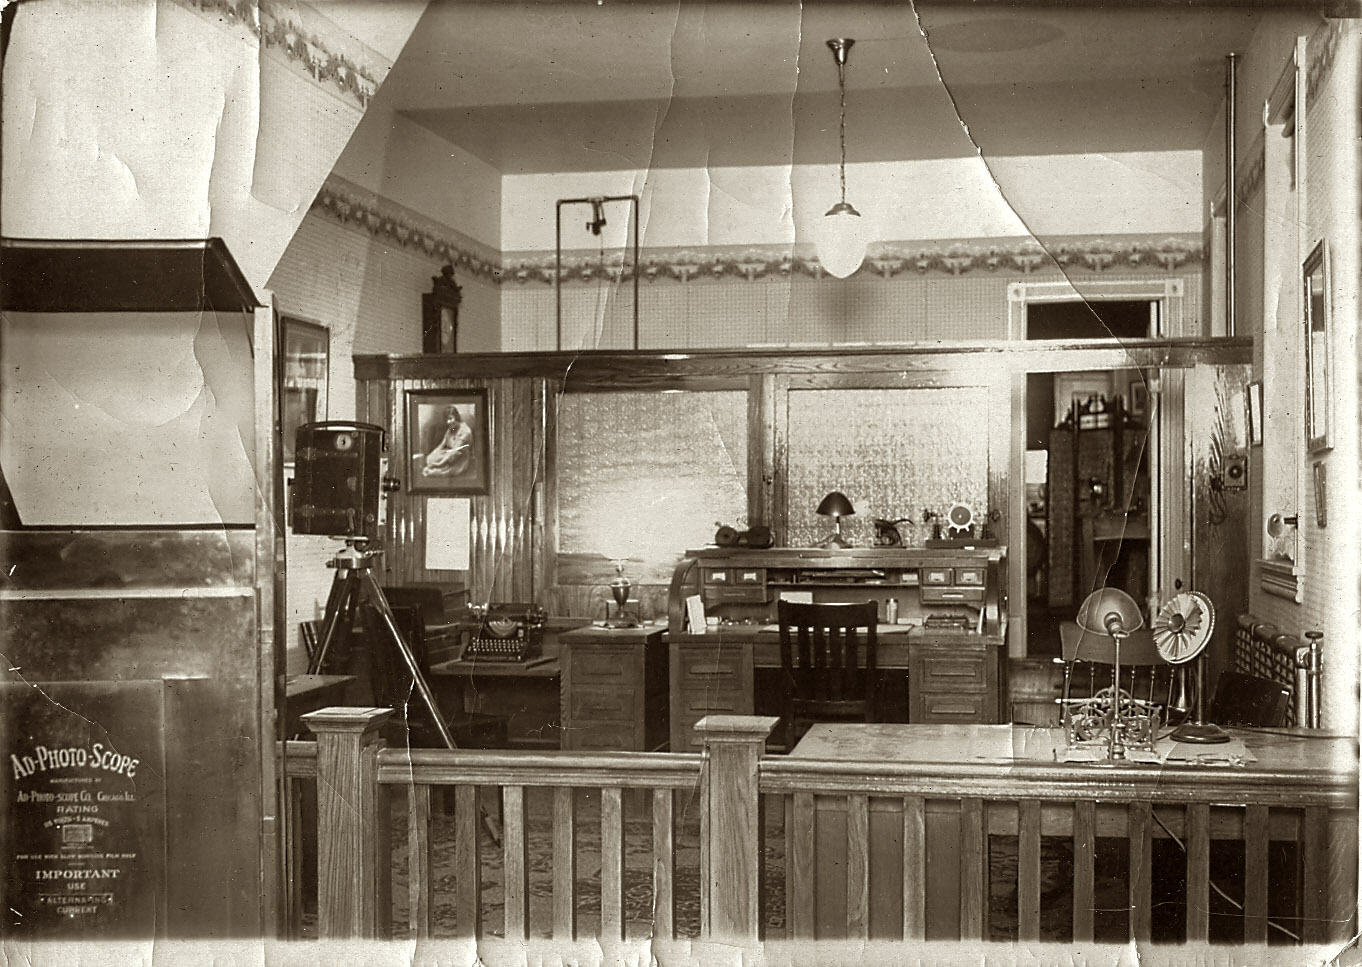 Photo studio, year unknown. Writing on the equipment at left says, among other things, "Use Alternating Current."